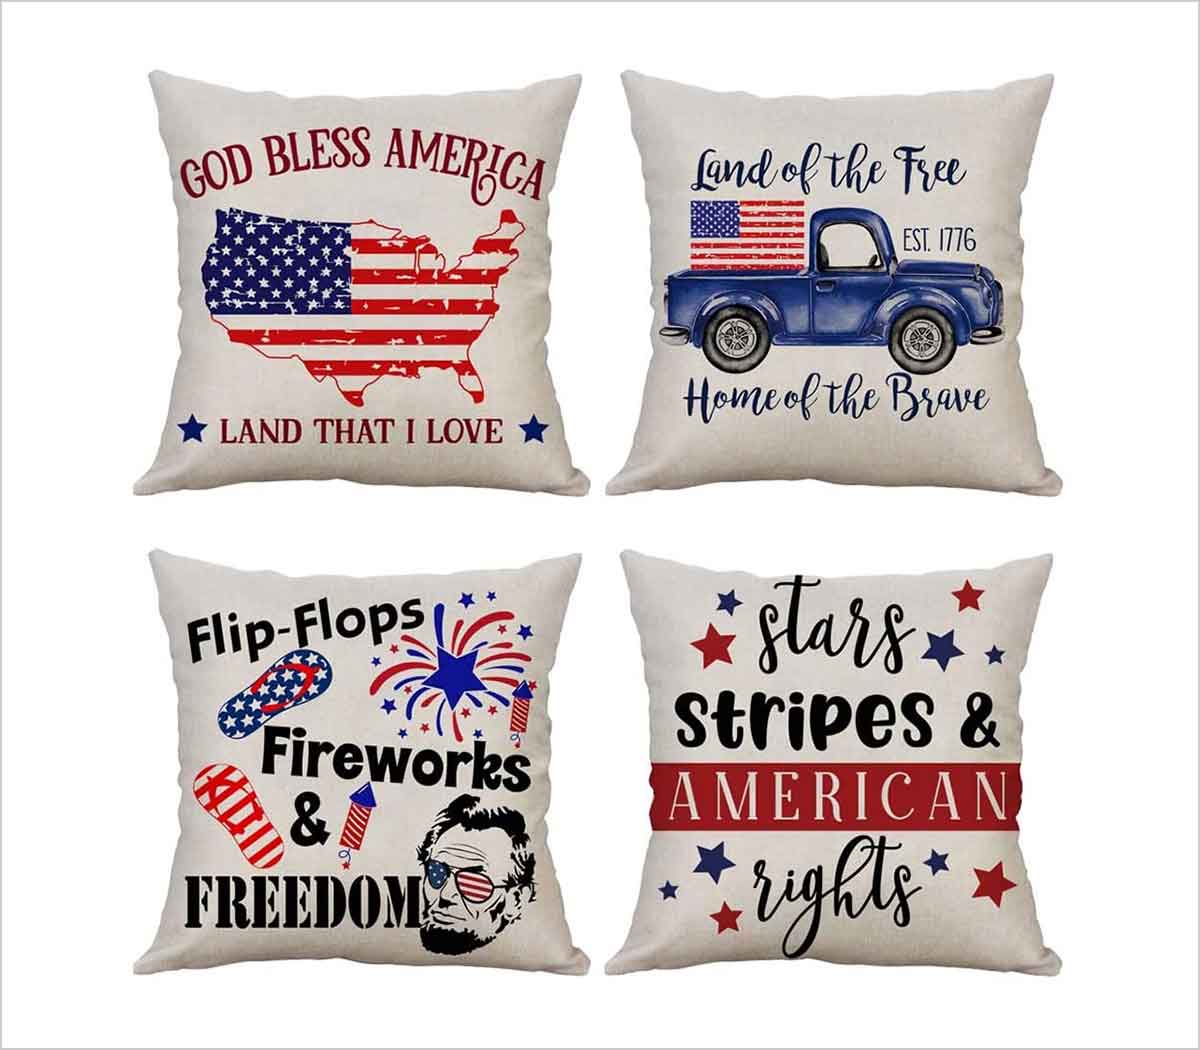 chuxin huang_pillow case Happy American Independence Day Lover Cotton Linen Decorative Throw Pillow Cover Cushion 45x45cm